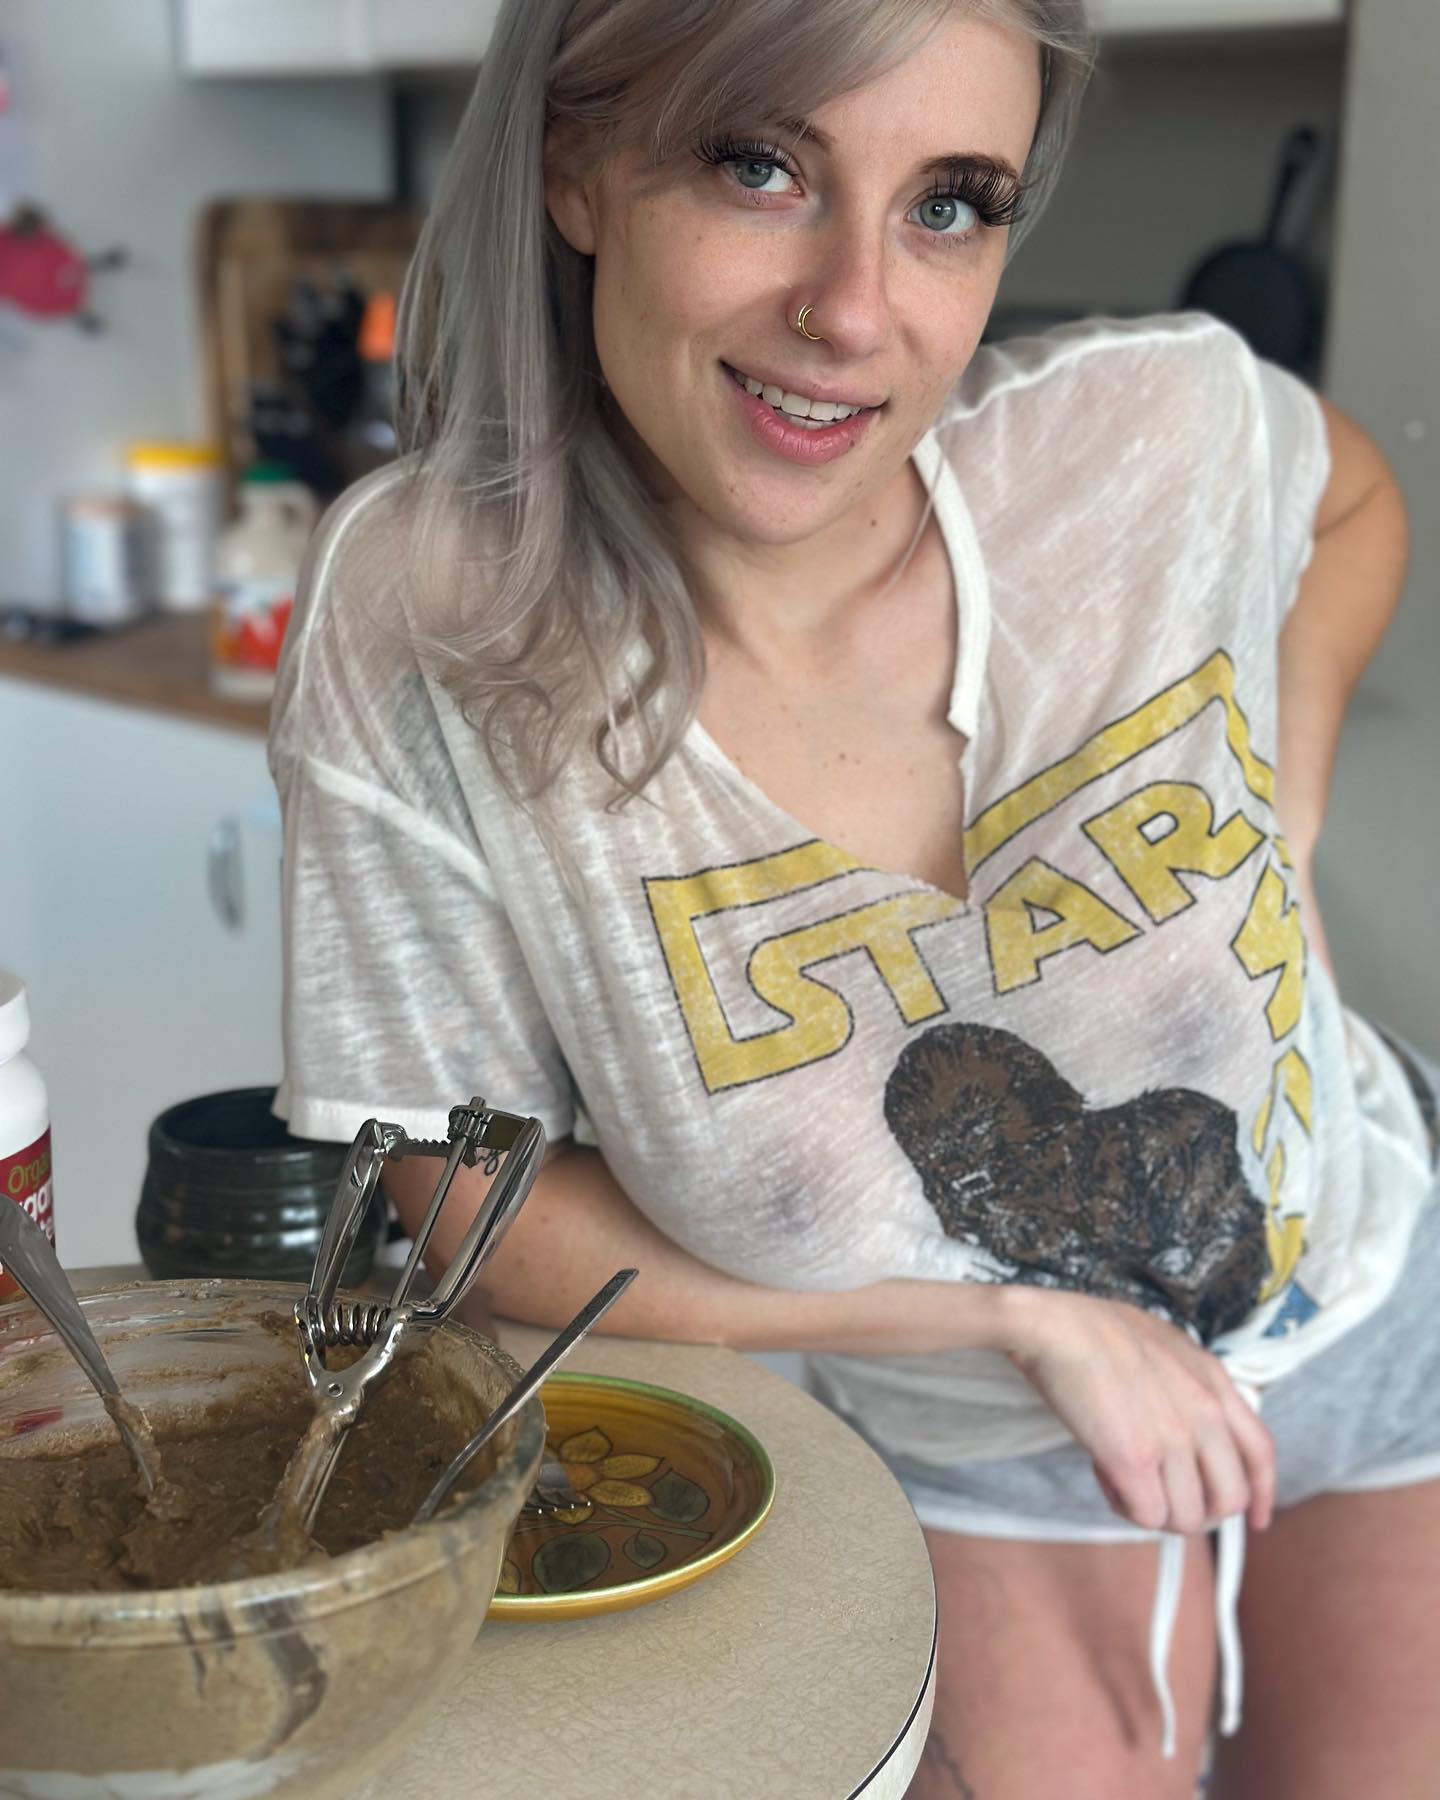 Protein Pancake meal prep on tiktok LIVE this morning💕Where do you like to watch people go LIVE?